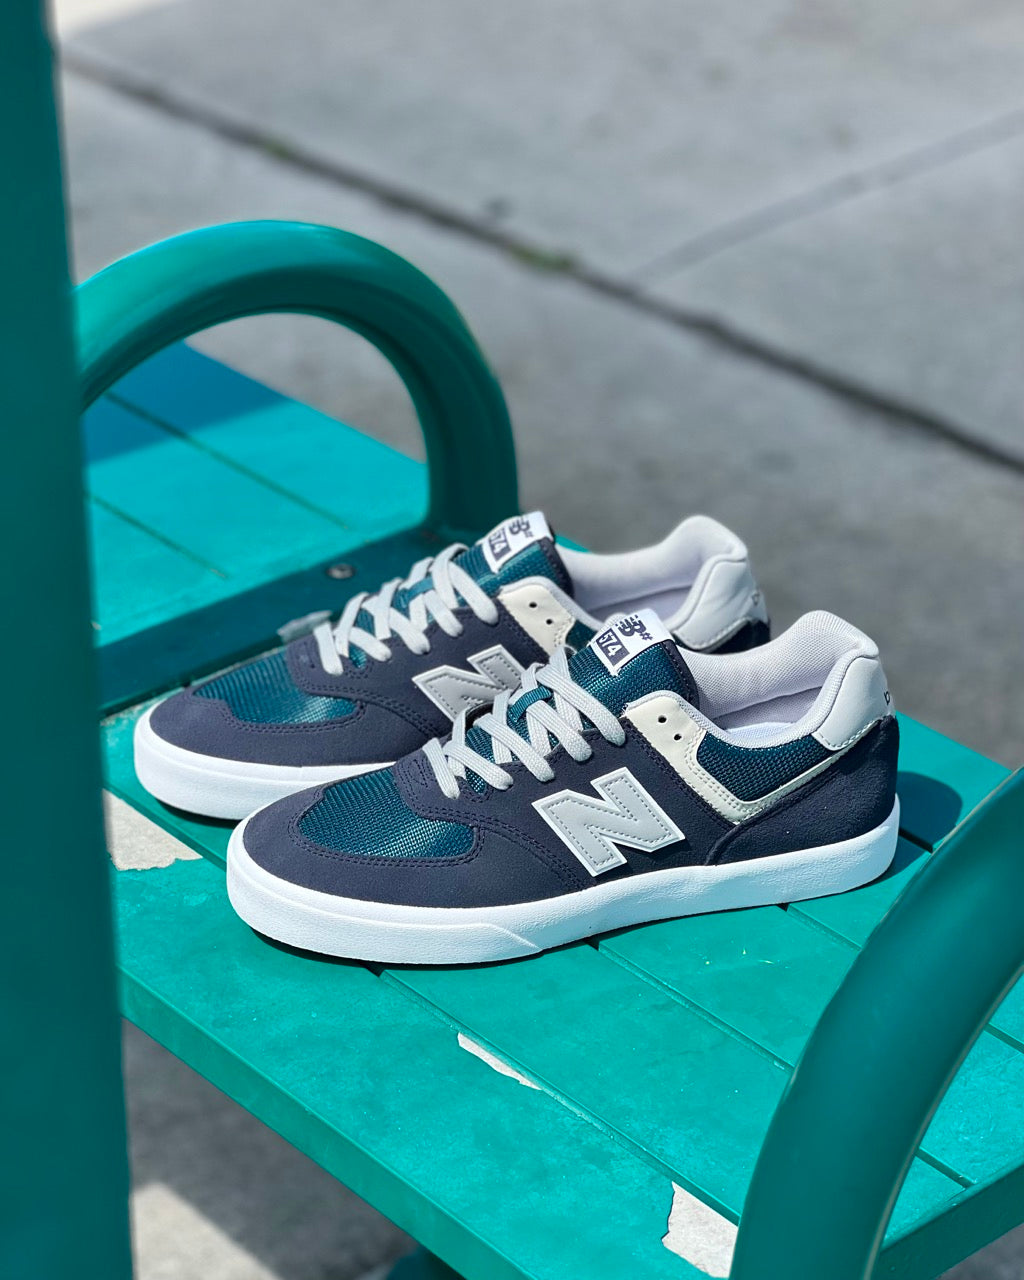 Image of a pair of New Balance Numeric 574 Vulc Skate Shoes inspired by the Classic New Balance 574 in Navy/Teal built for skateboarding